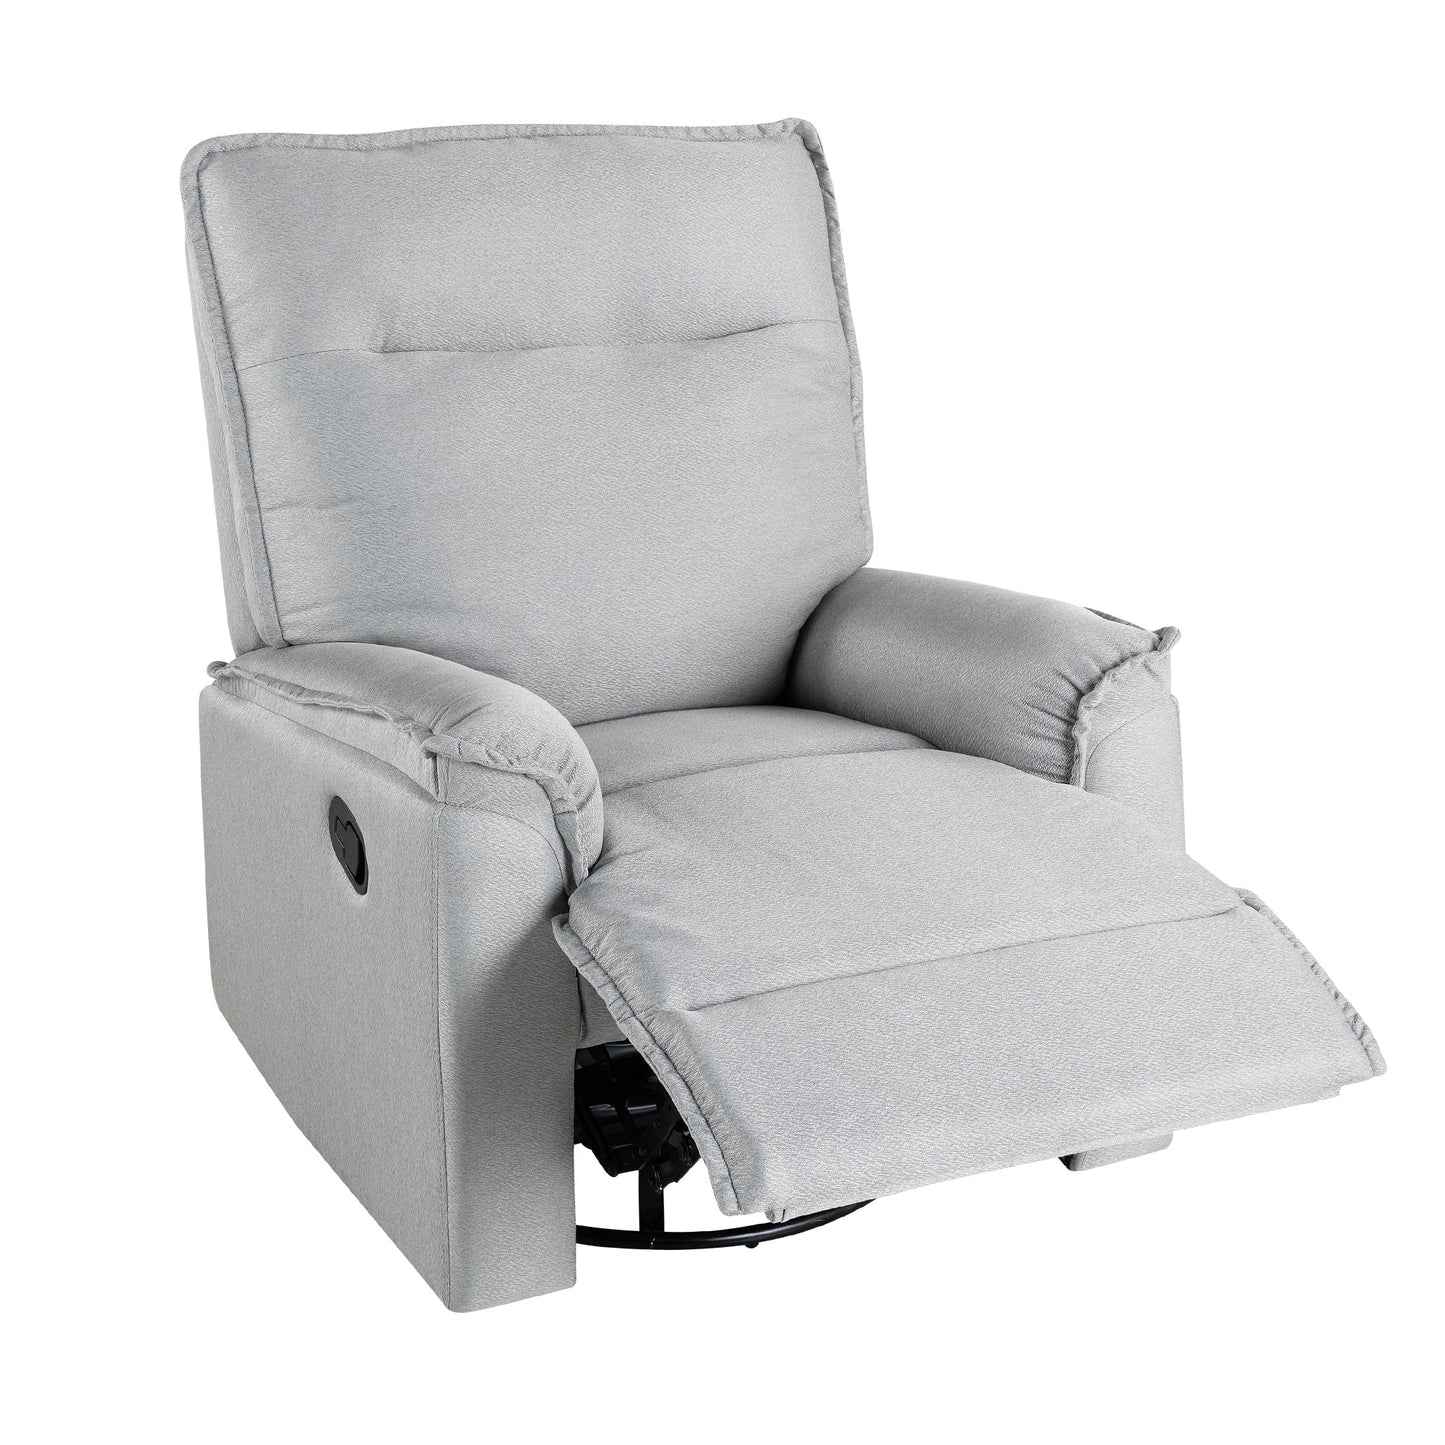 360 Degree Swivel Recliner Manual Recliner Chair Theater Recliner Sofa for Living Room, Grey